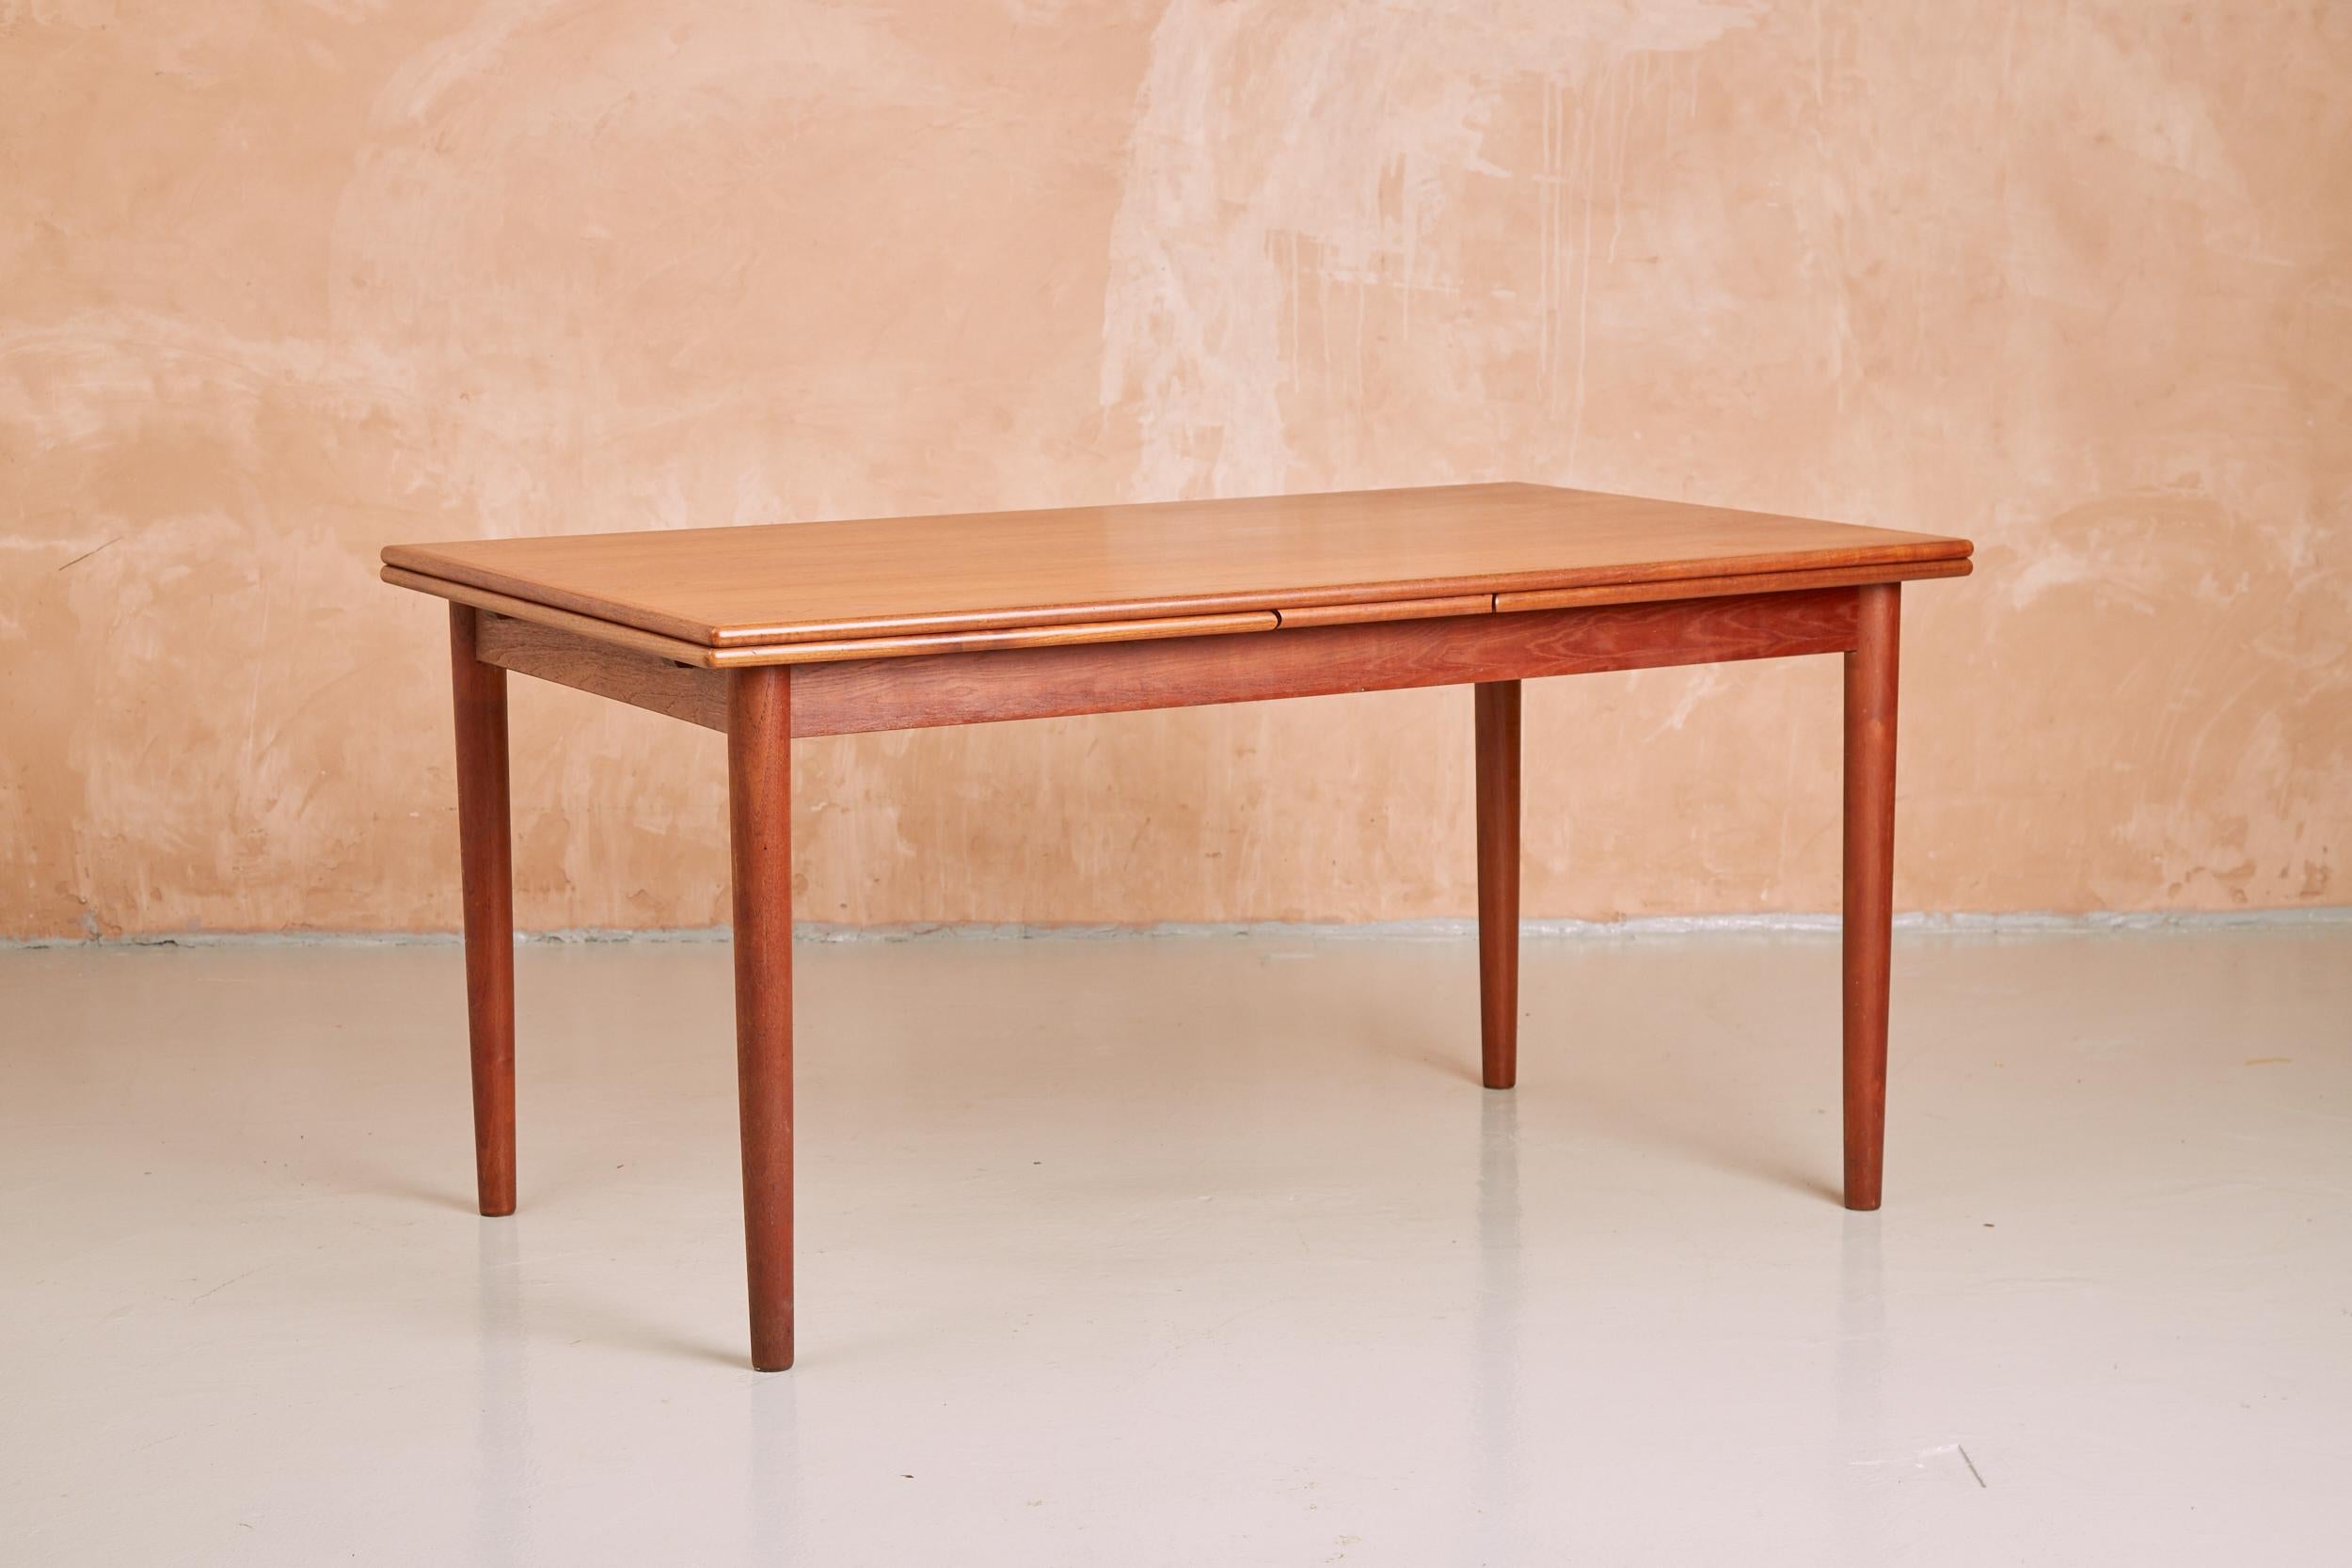 An iconic draw leaf teak extending dining table, manufactured by the Danish brand AM Møbler (Ansager Møbler) in the 1960s.

Seats 6 when closed (145 cm) and up to 10 when extended (266 cm). The leaves extend simply by pulling out from below the main